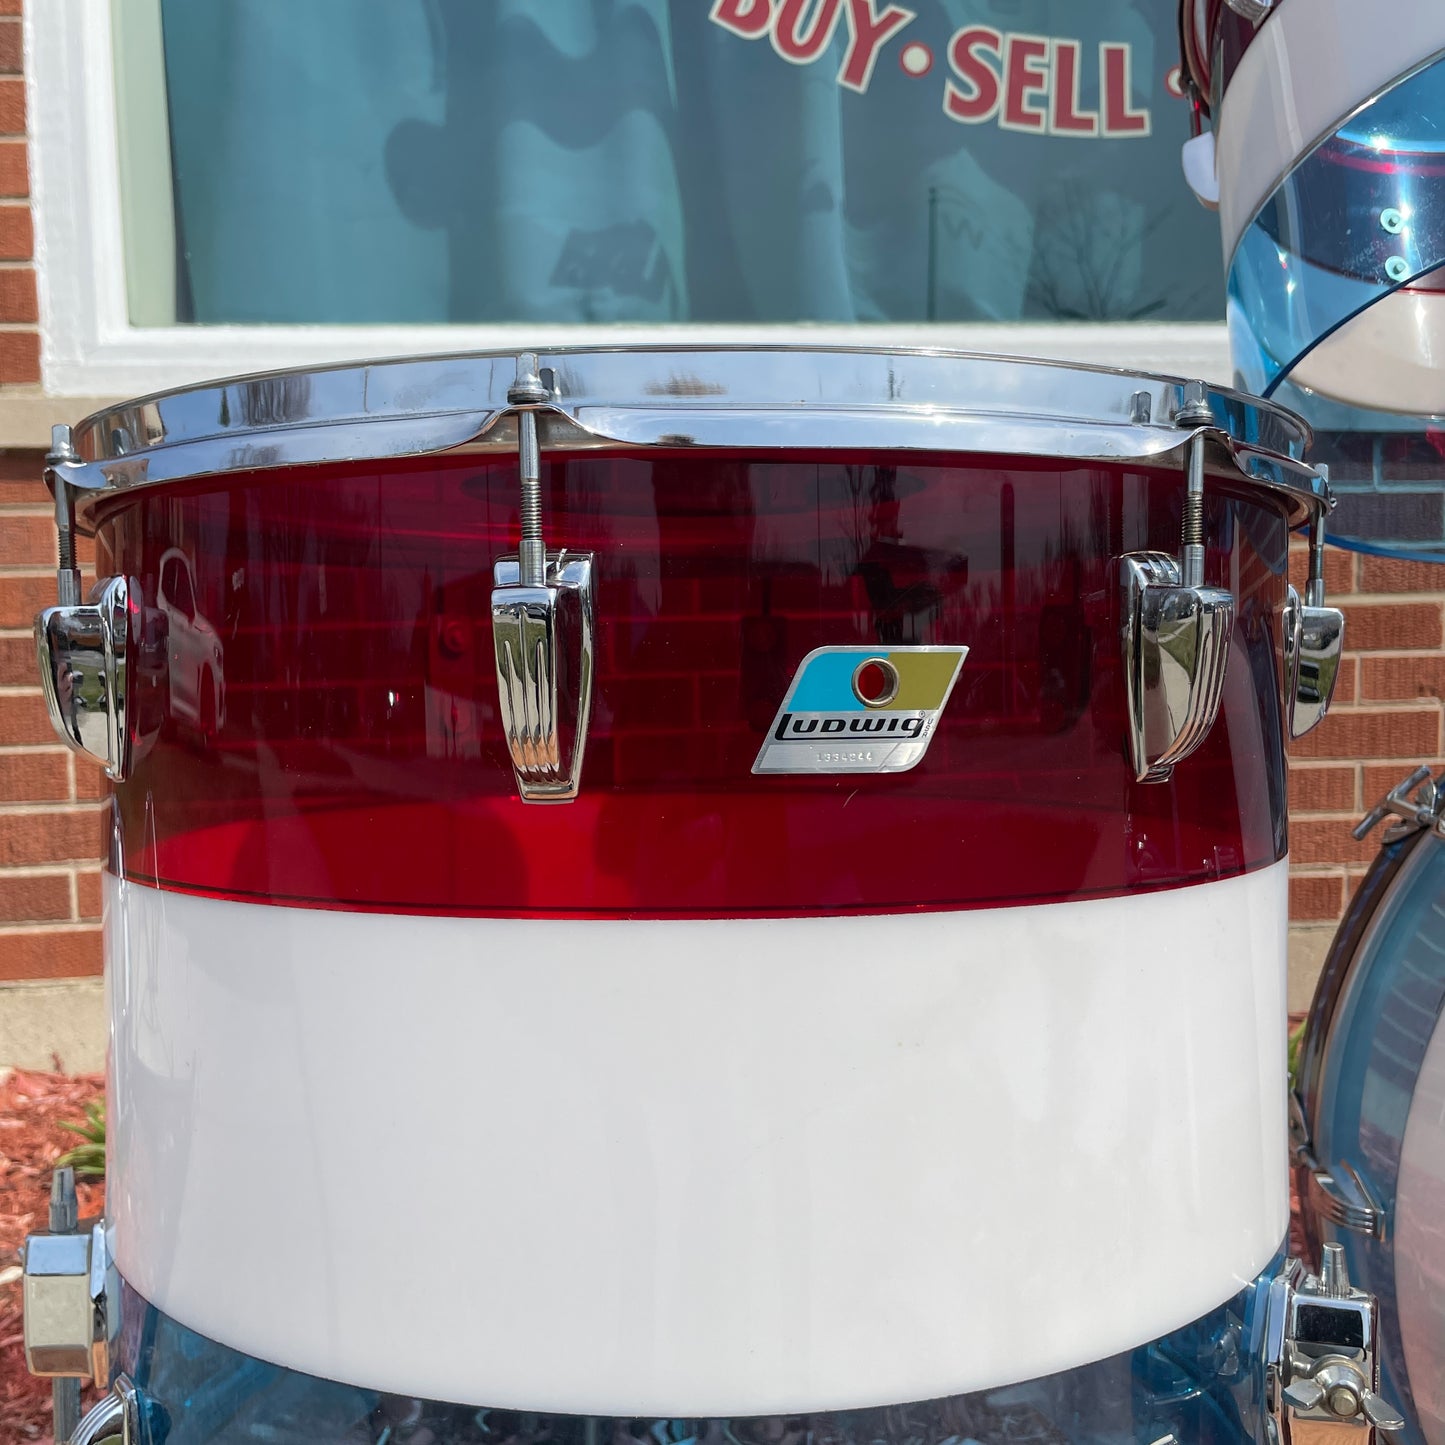 1970s Ludwig Bicentennial Vistalite Dual Bass Drum Set w/ Snare & Concert Toms Red/White/Blue